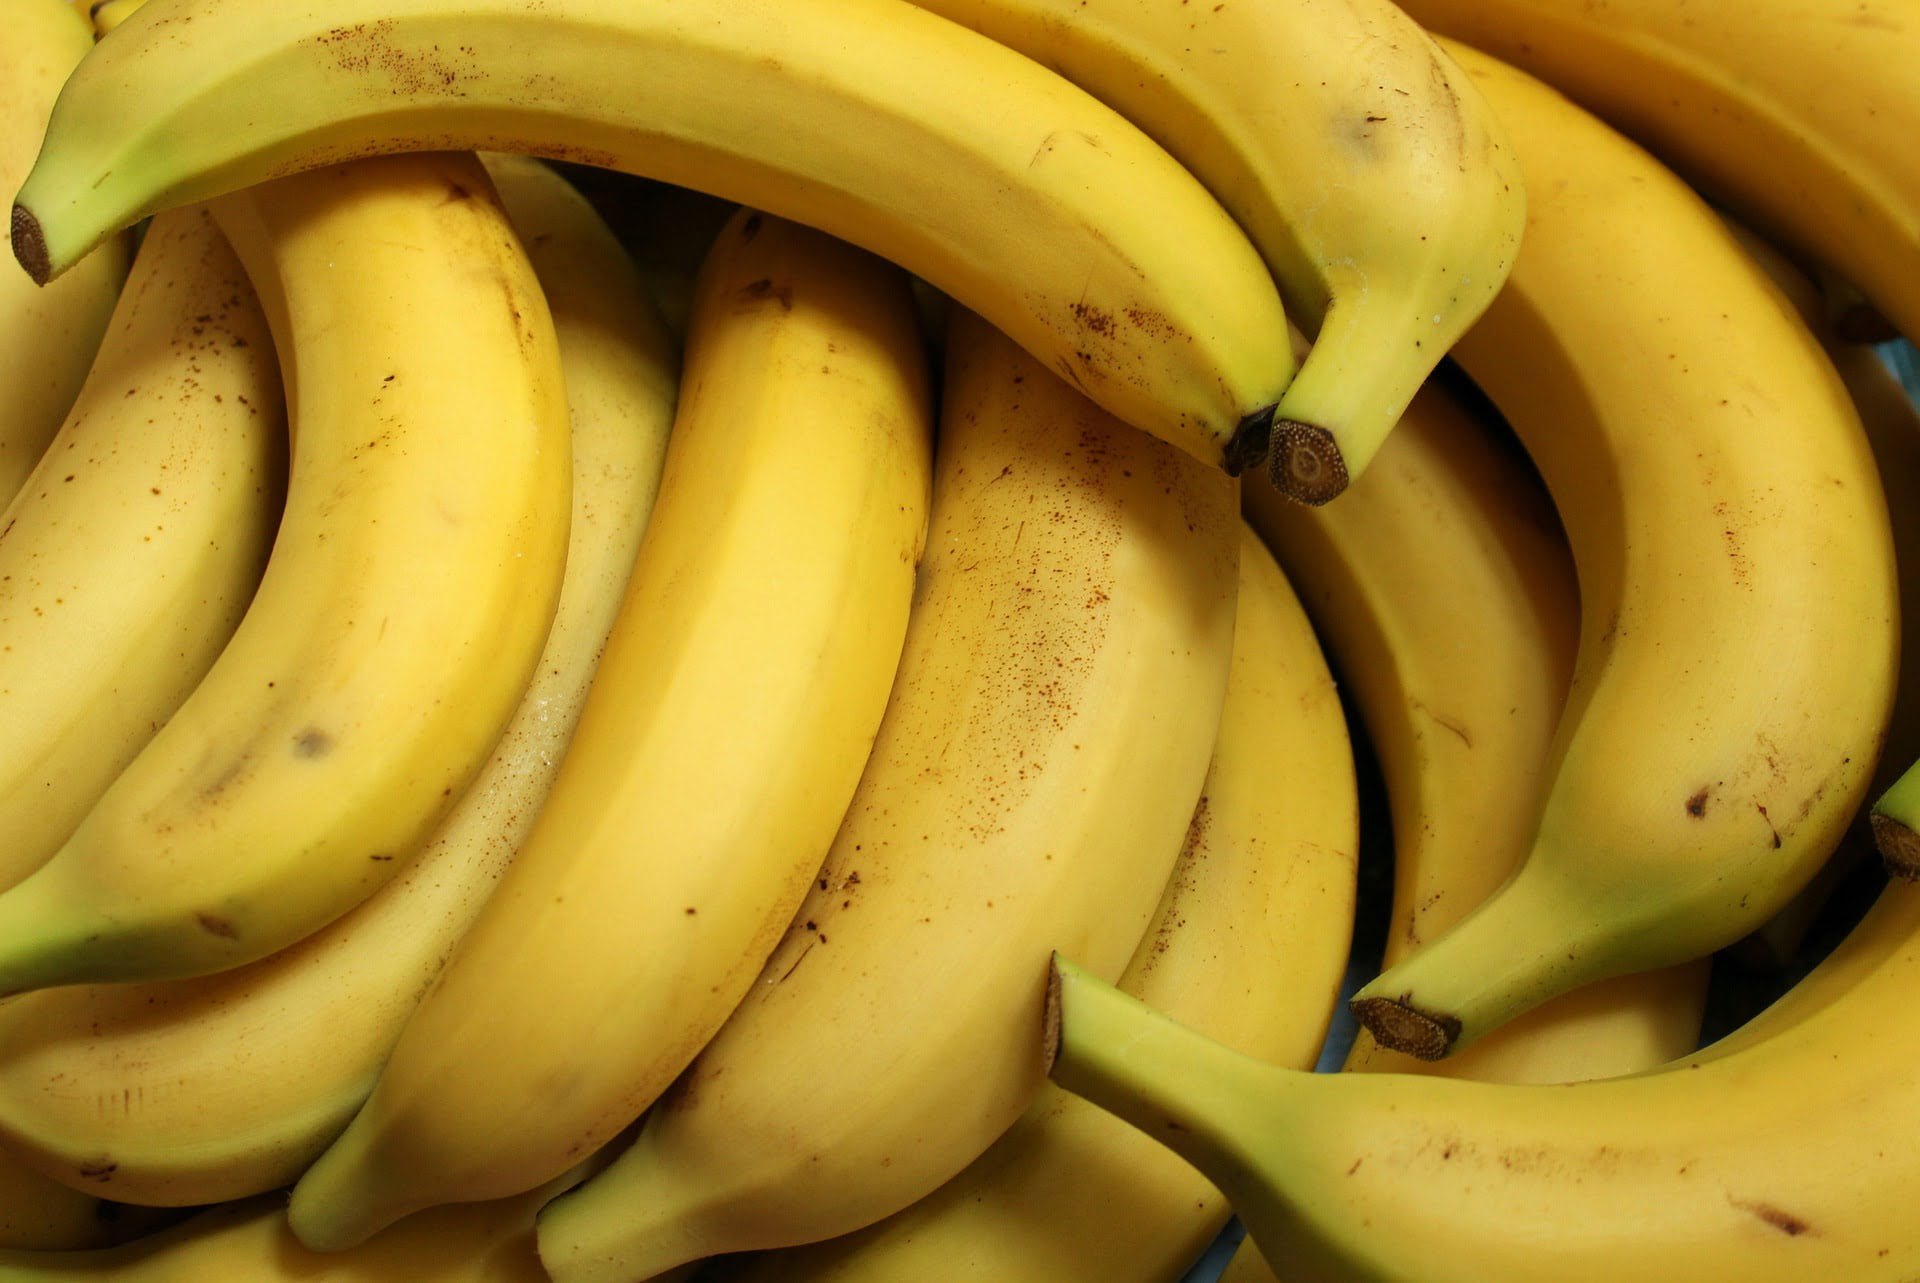 Ugandan smallholder banana farmers are reducing banana waste by transforming stems into fibres that can be used for sustainable textile and handicrafts products.